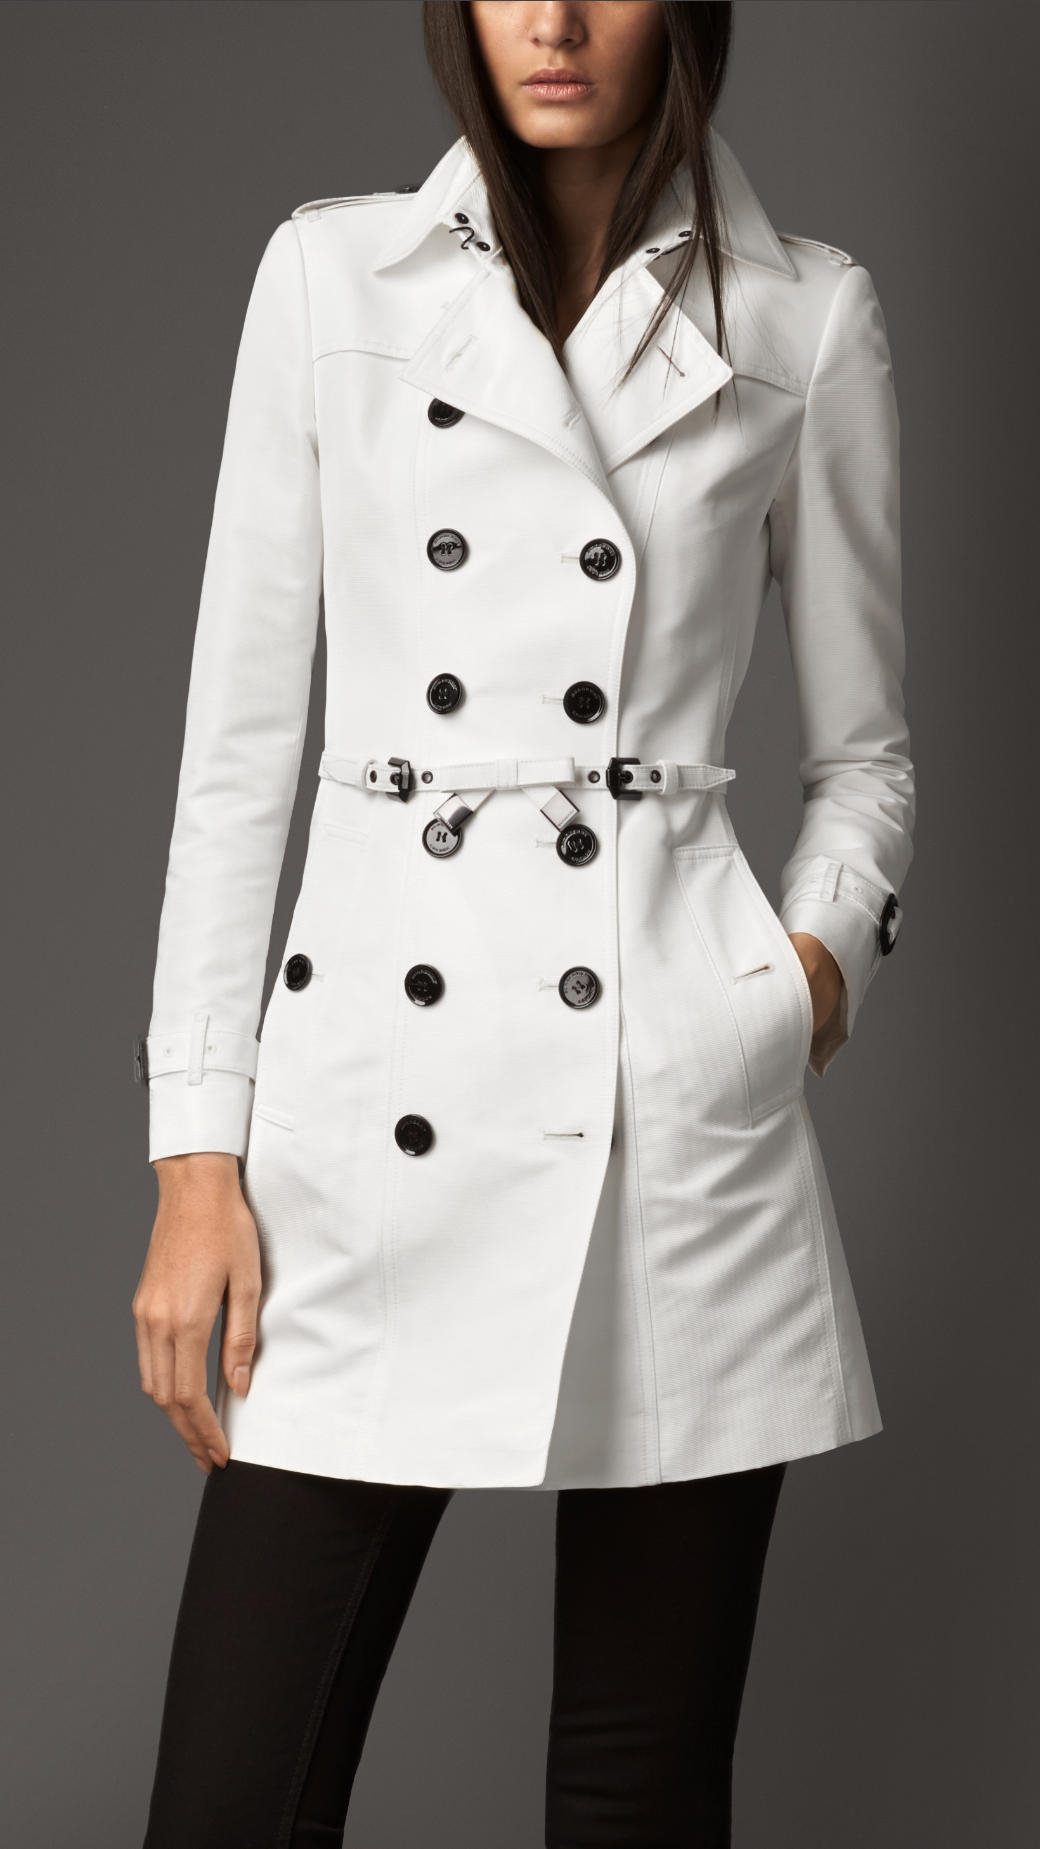 Lyst - Burberry Midlength Silkblend Faille Trench Coat in White